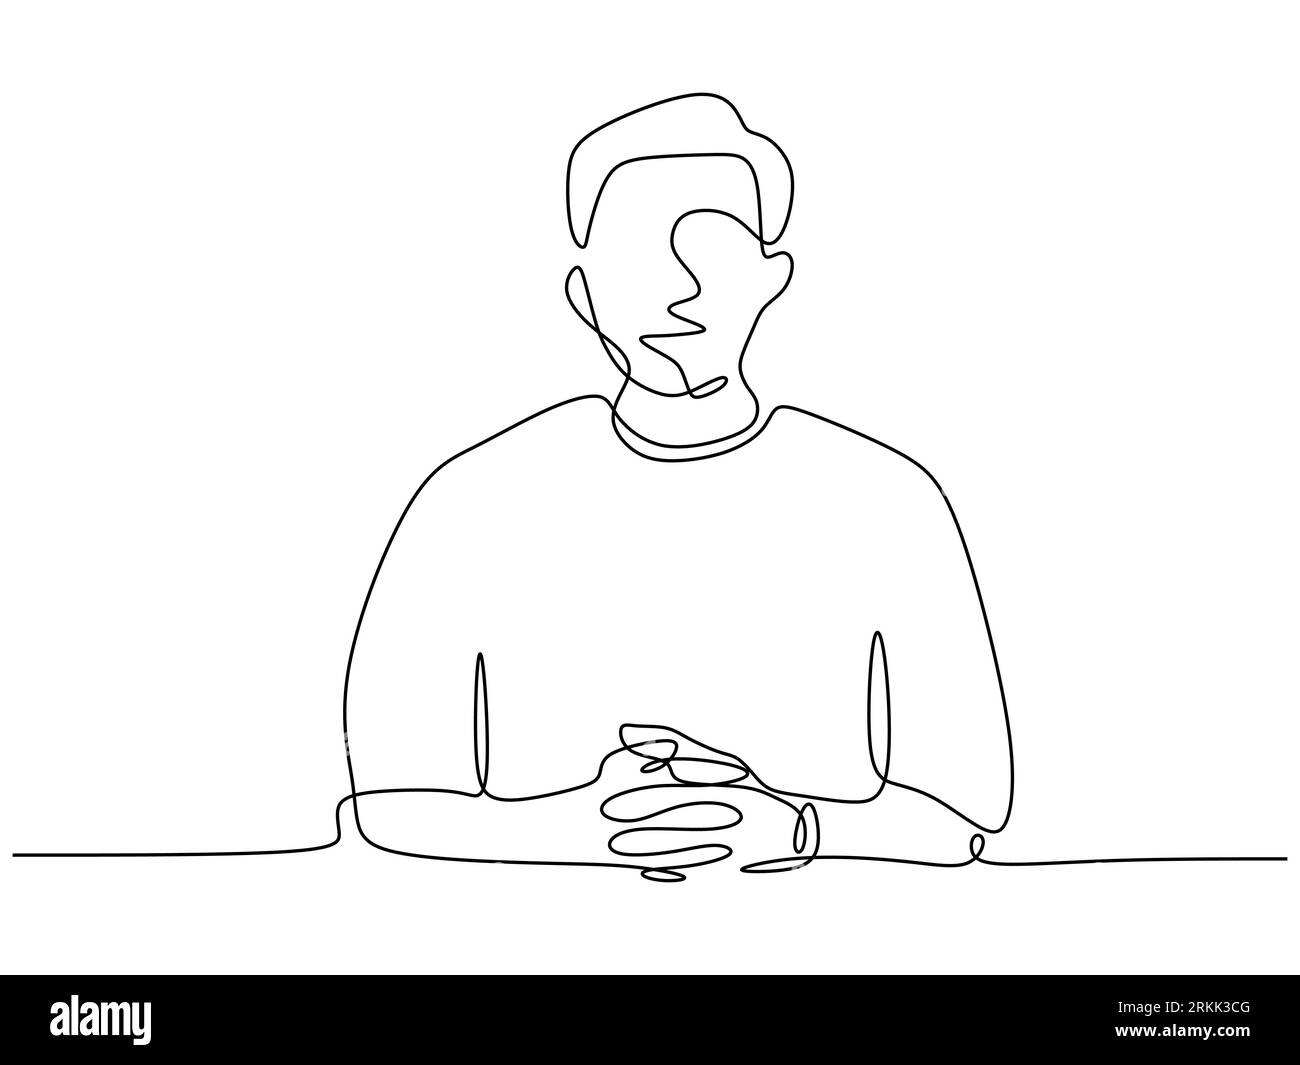 Line drawing person sitting down Cut Out Stock Images & Pictures - Alamy